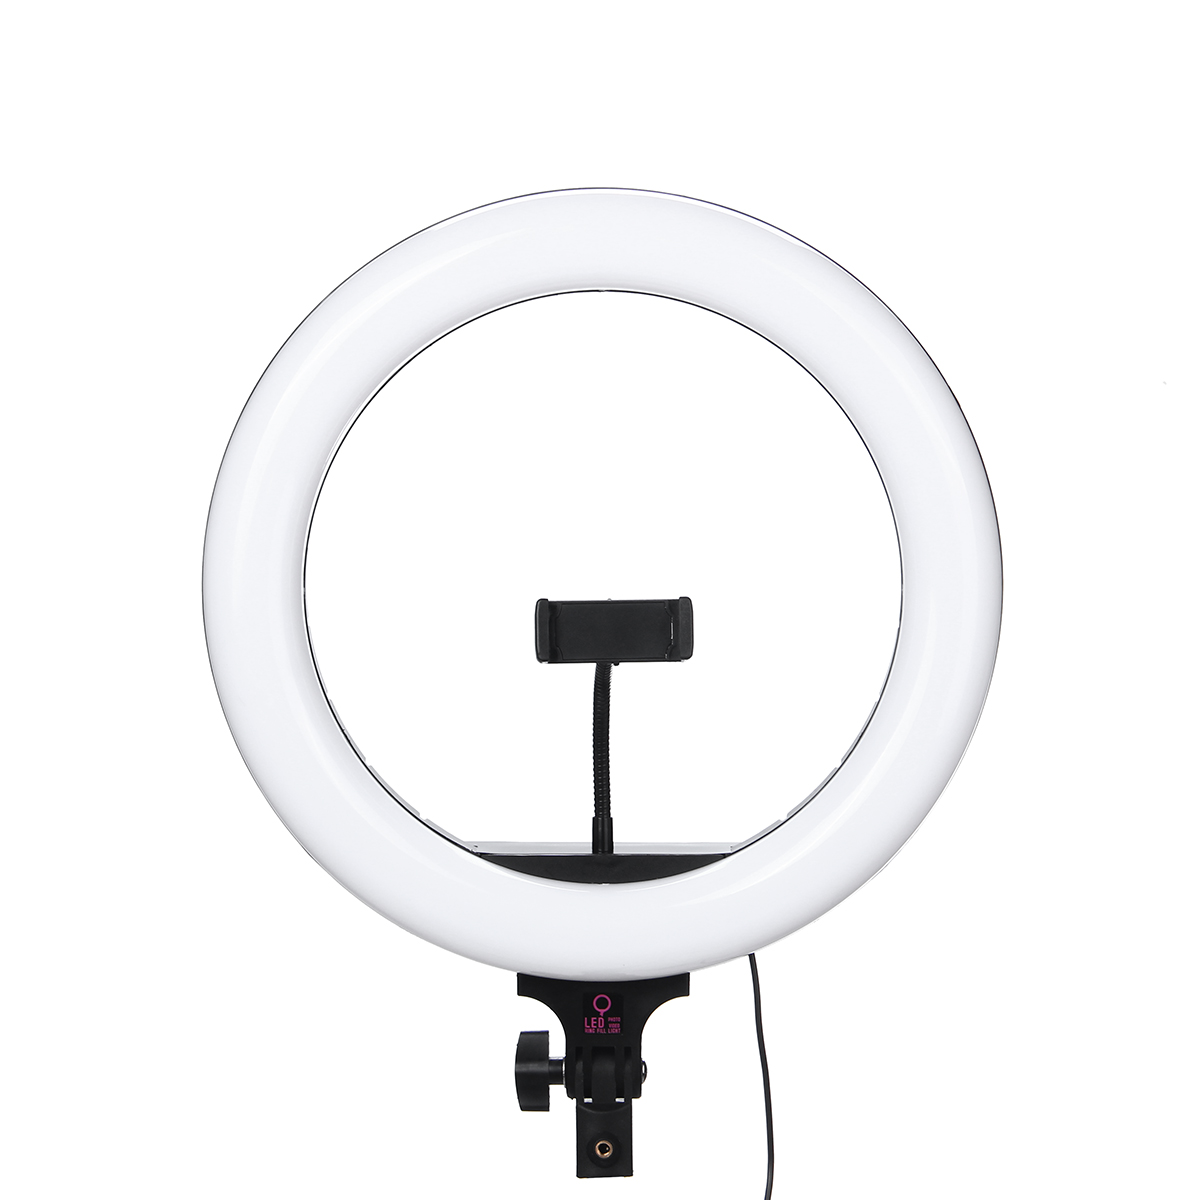 710131518-Inch-LED-Ring-Light-Studio-Fill-Light-Tripod-Stand-Photo-Makeup-Live-Dimmable-Lamp-for-You-1708205-10